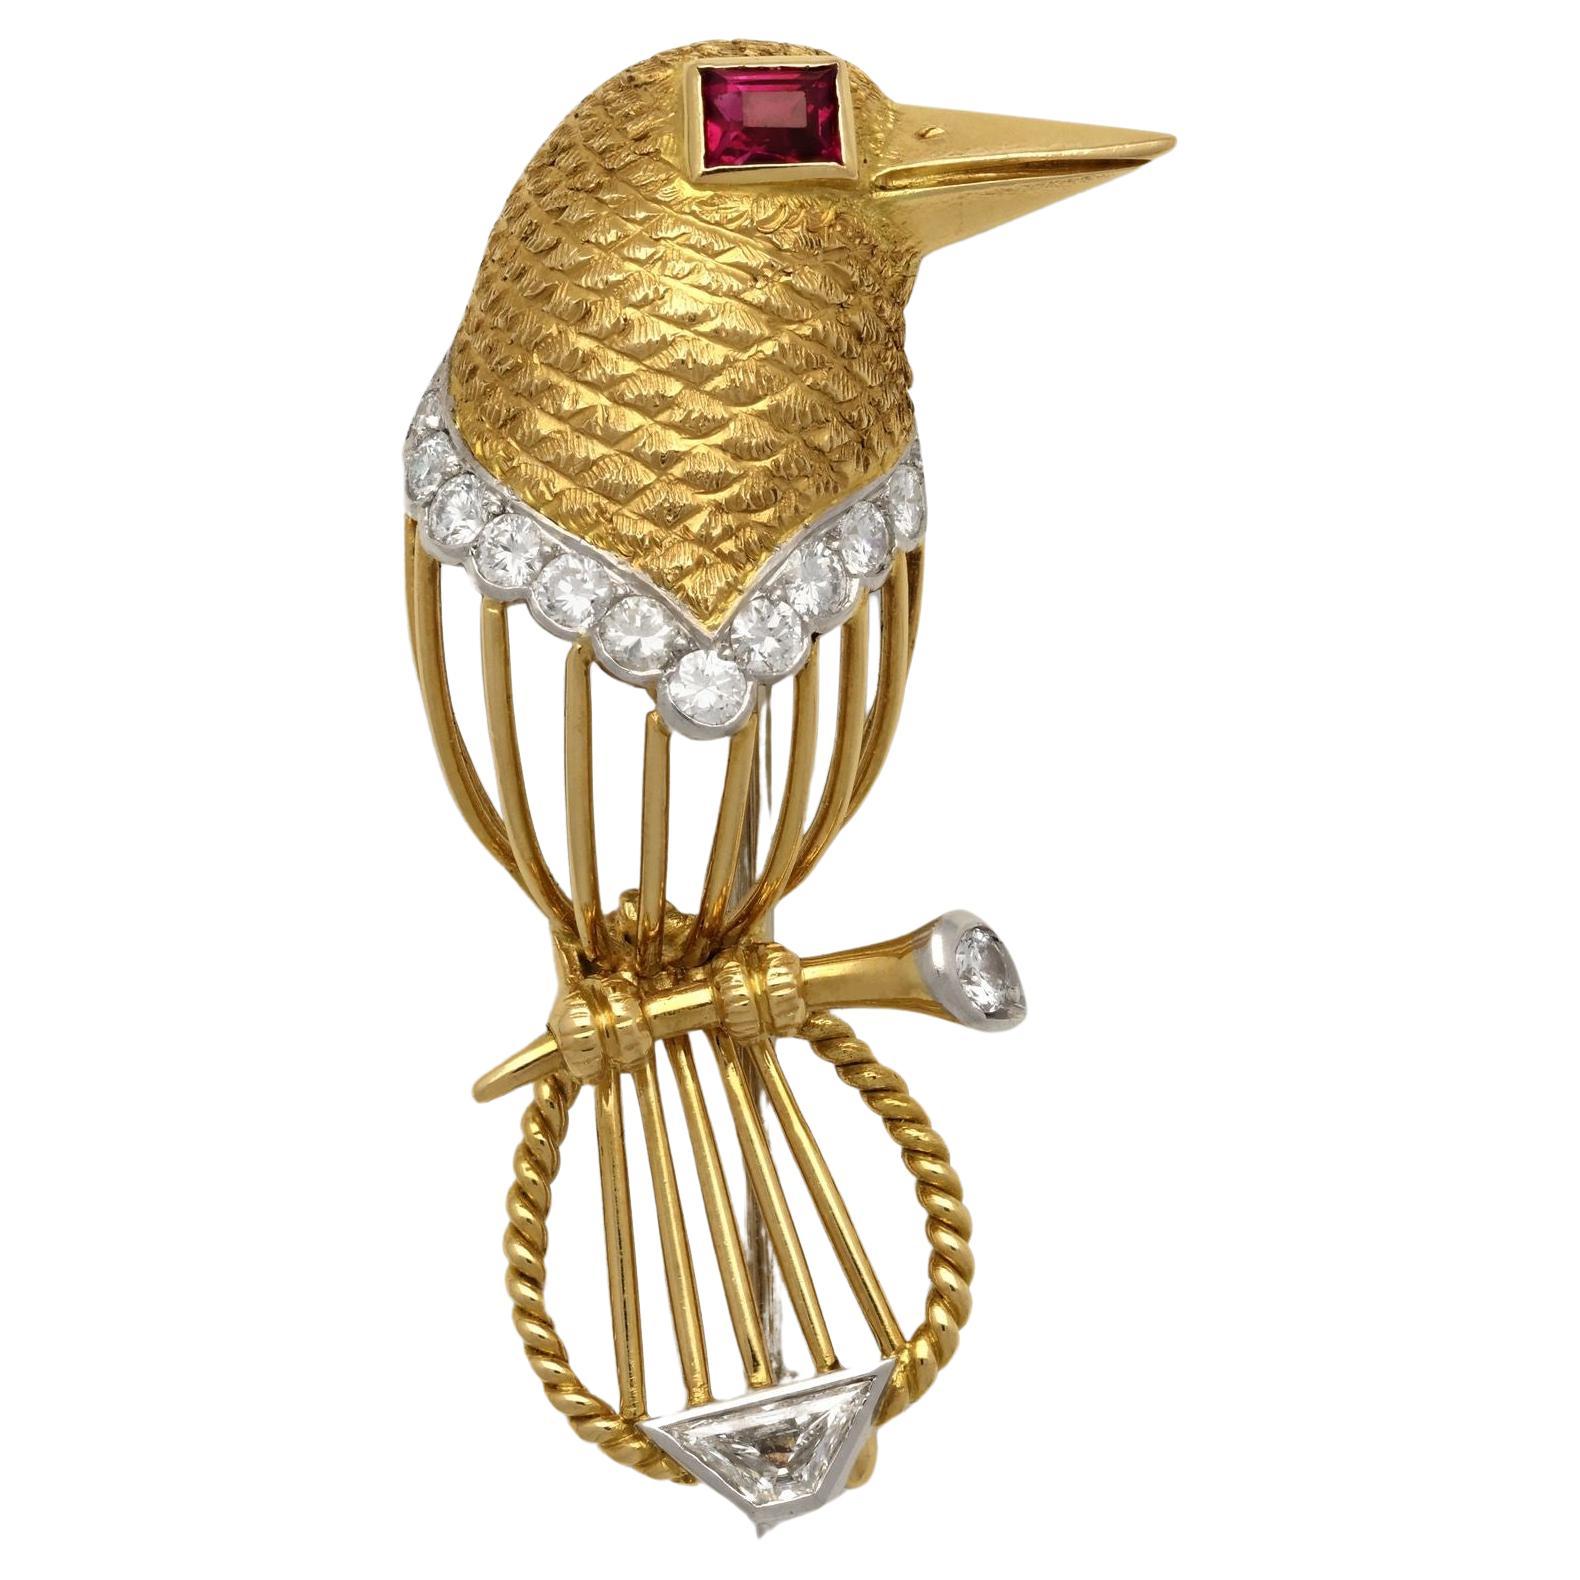 Cartier Vintage Stylised Bird Brooch in 18ct Yellow Gold with Burma Ruby Ca 1960 For Sale